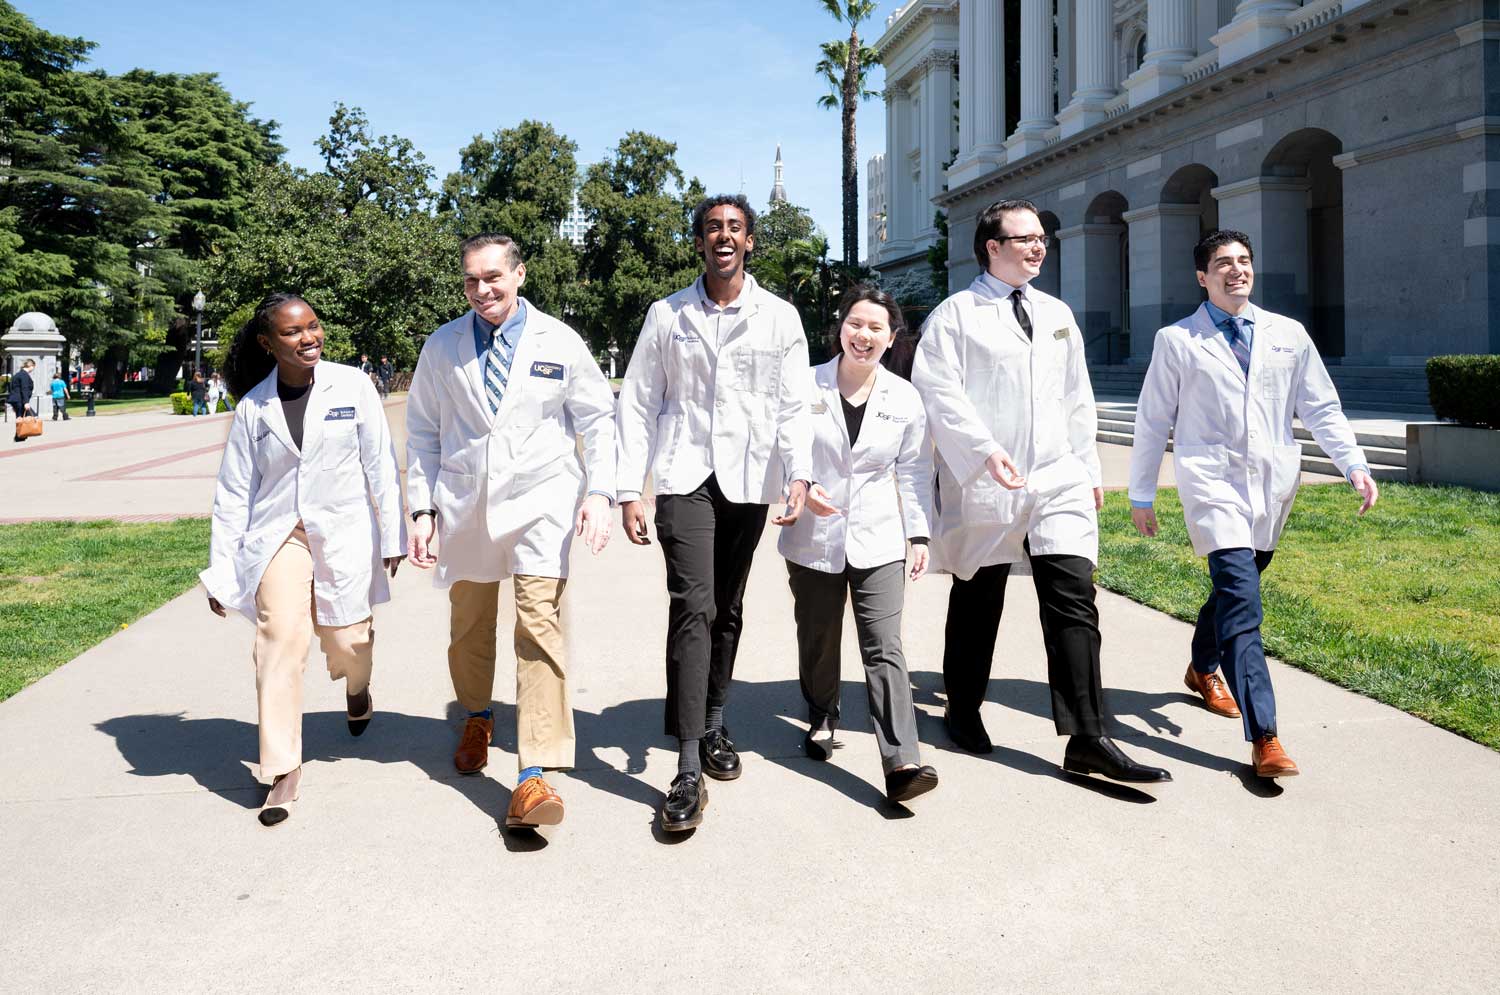 A group of medicine, pharmacy, and dental students wearing white coats smile as they walk together on a sunny pavement outisde the California State Capitol building in Sacramento.